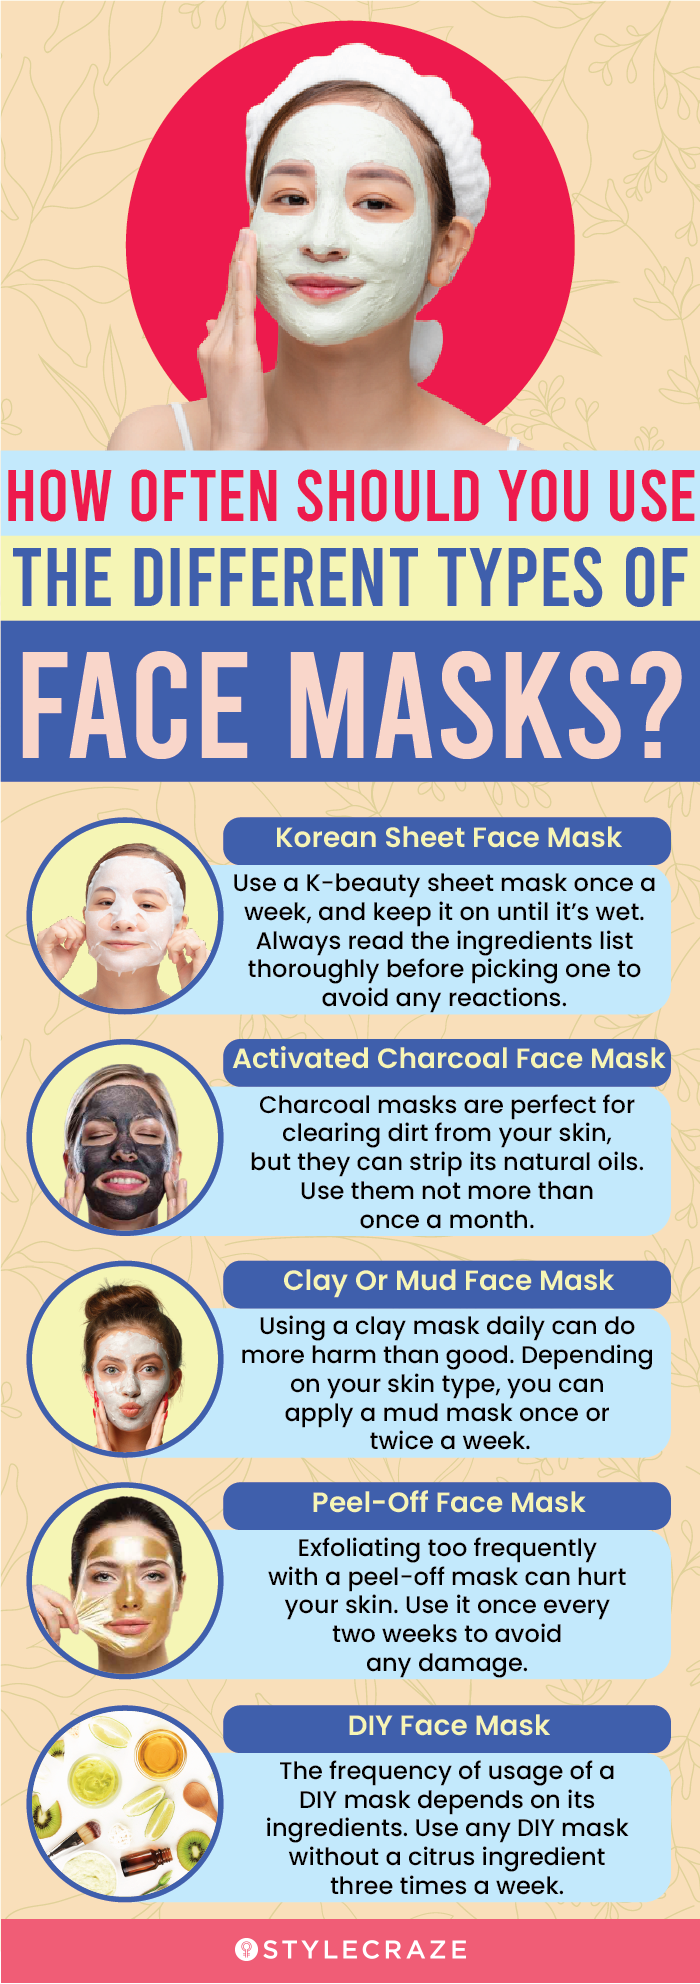 How Should You Use Face Masks?